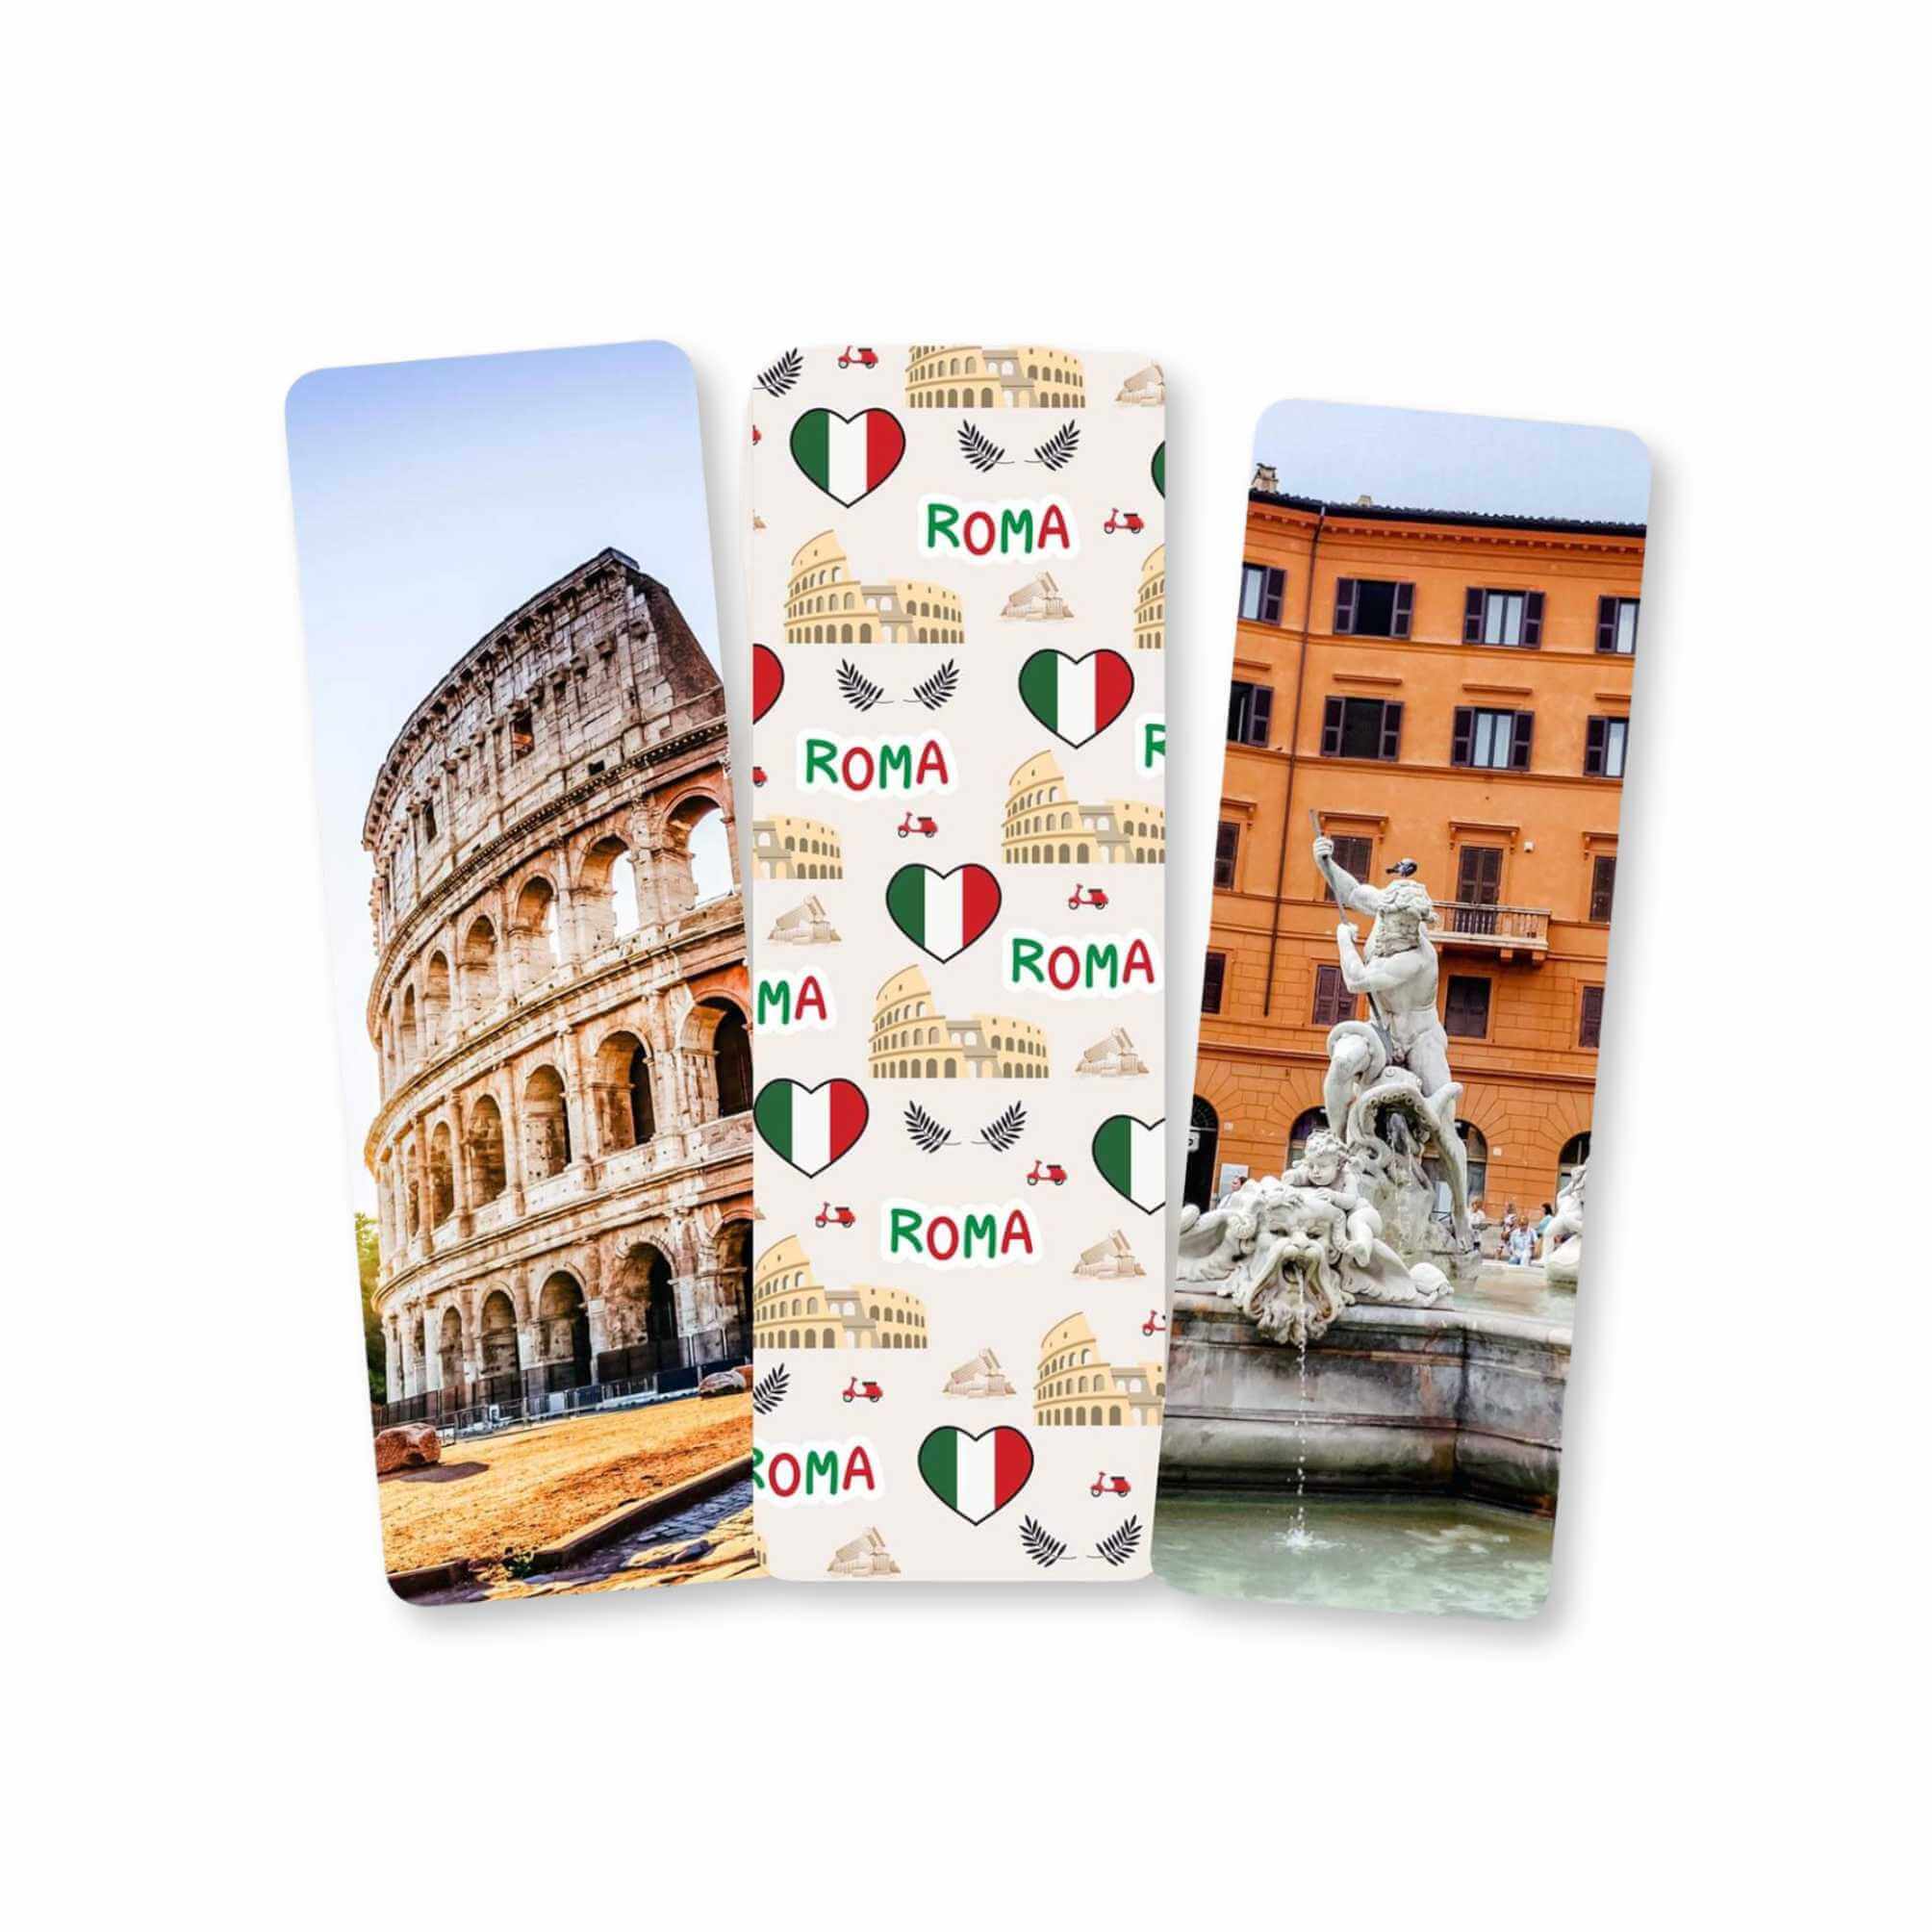 Rome bookmarks